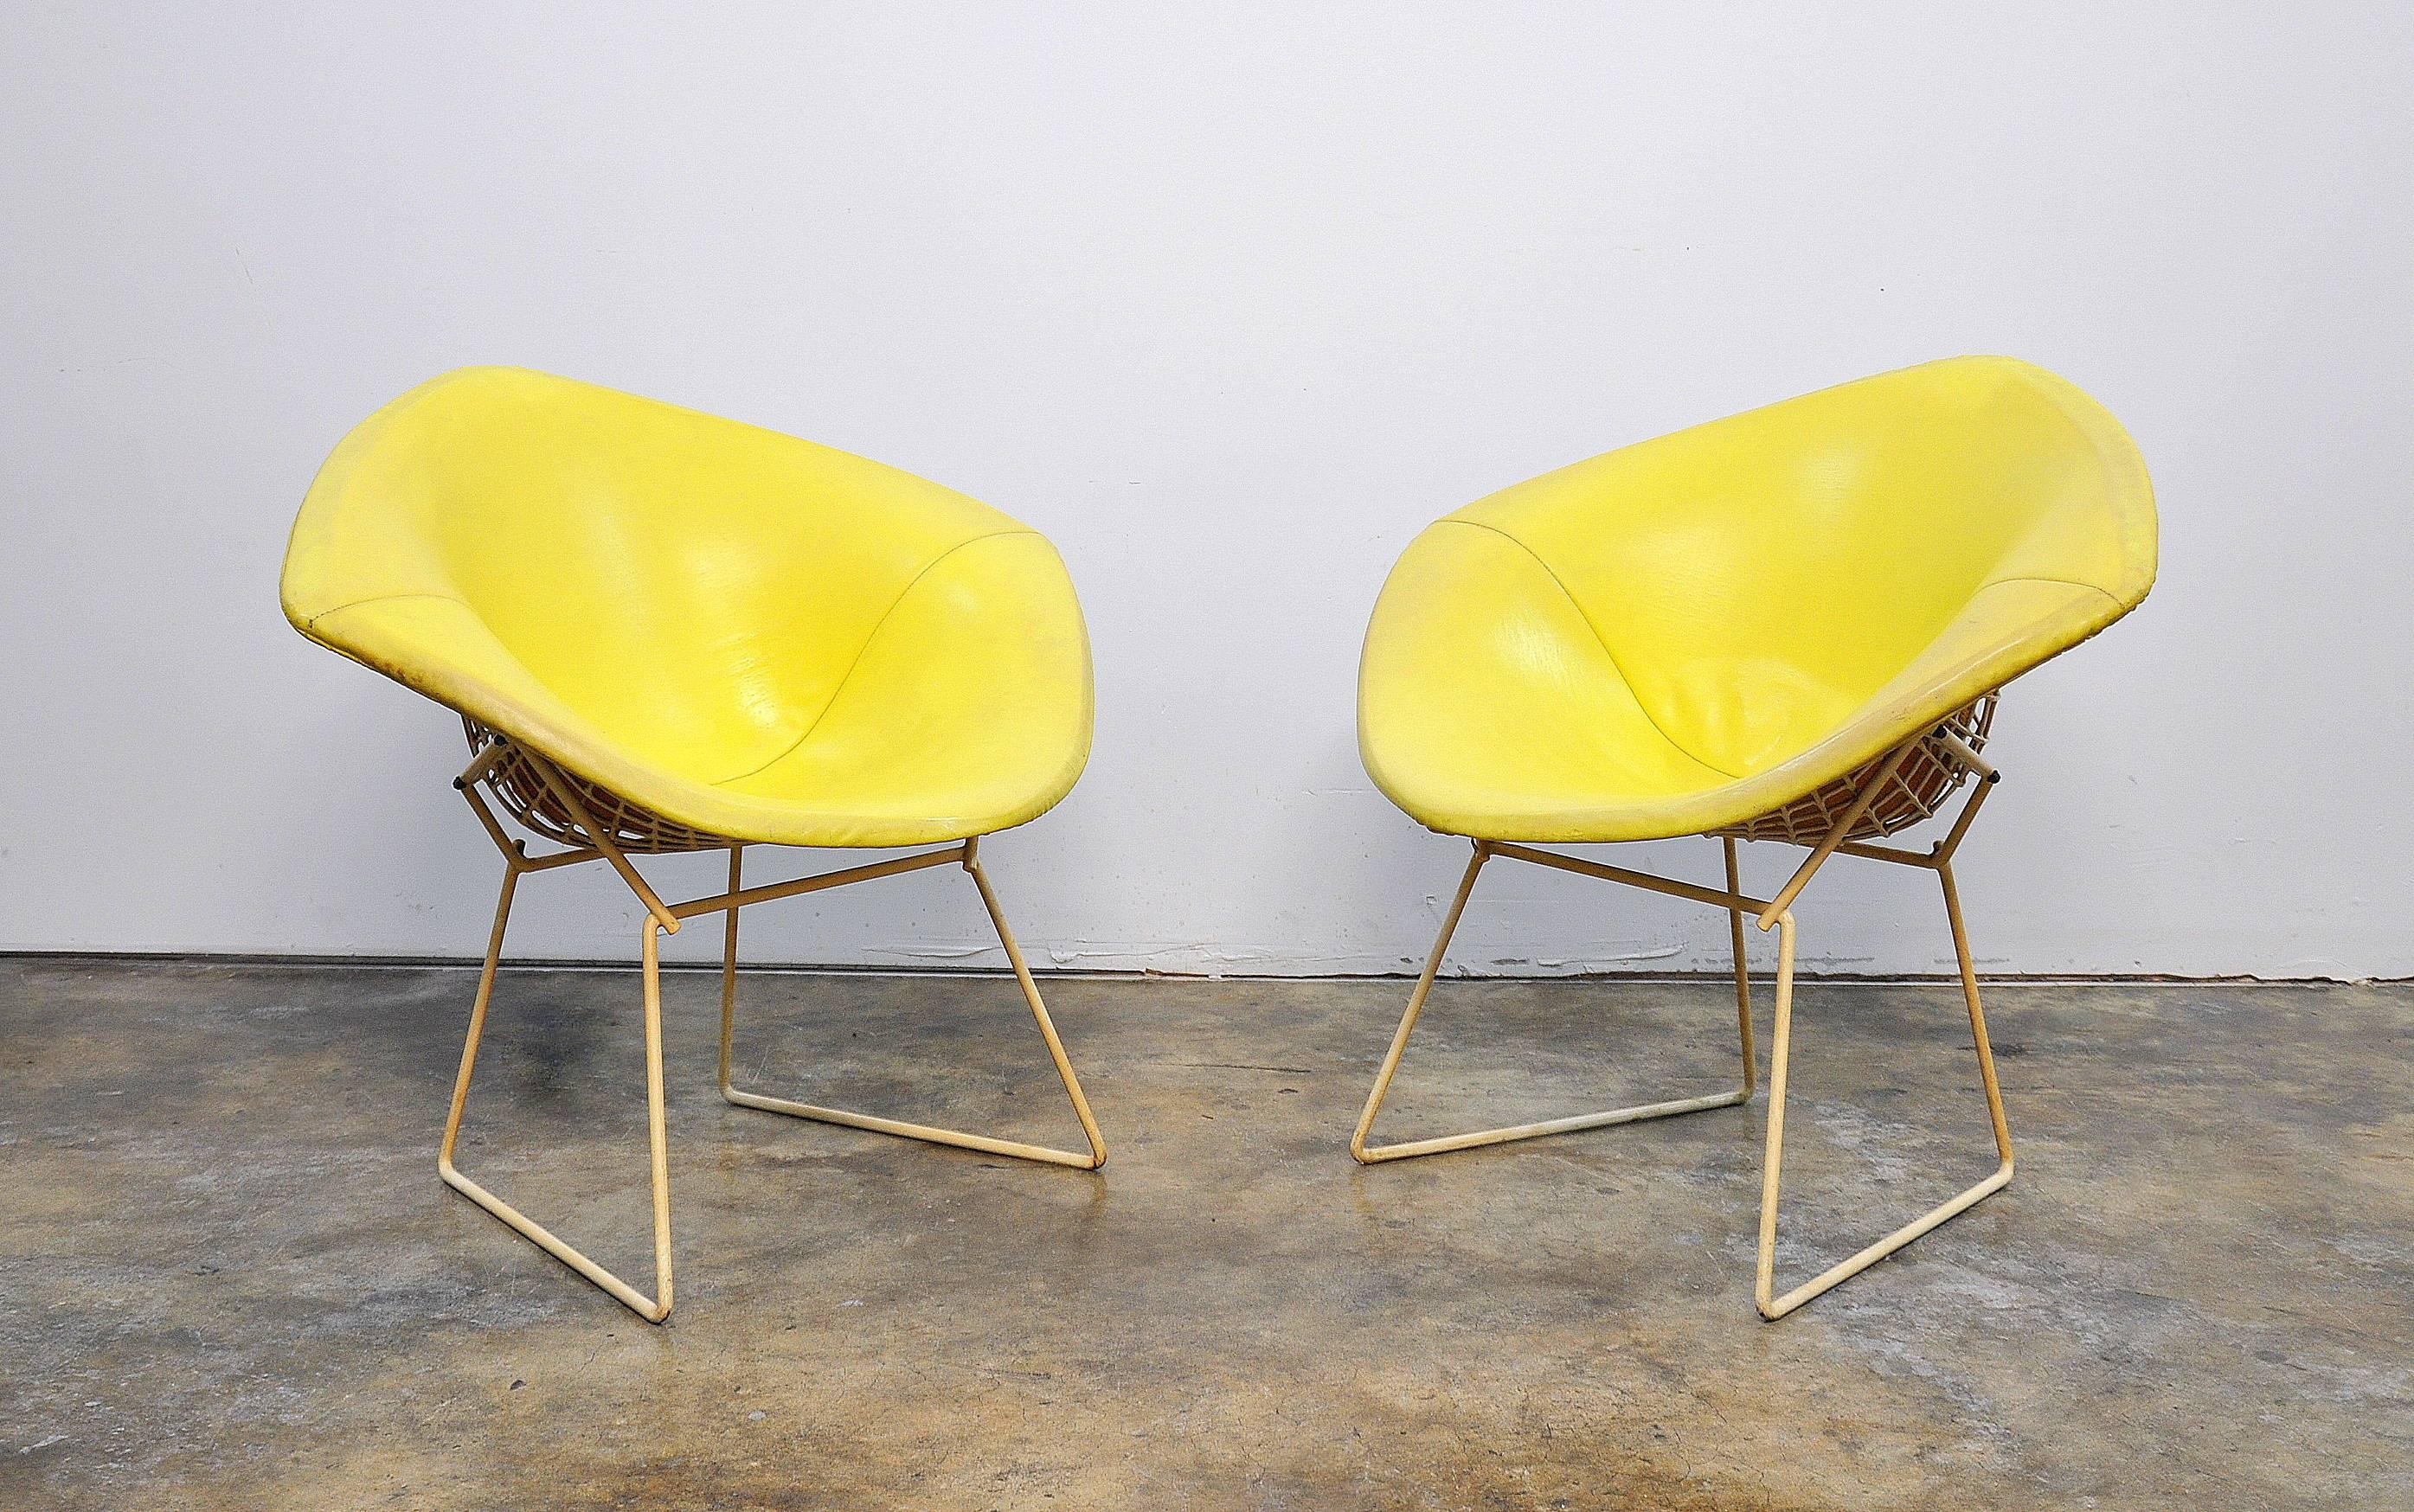 These second edition mid-century modern wire chairs feature vinyl coated steel frames with a gleaming patina. The yellow hues of the patina accent the chairs' original yellow vinyl Knoll covers beautifully. Ergonomic curvature allows for a very